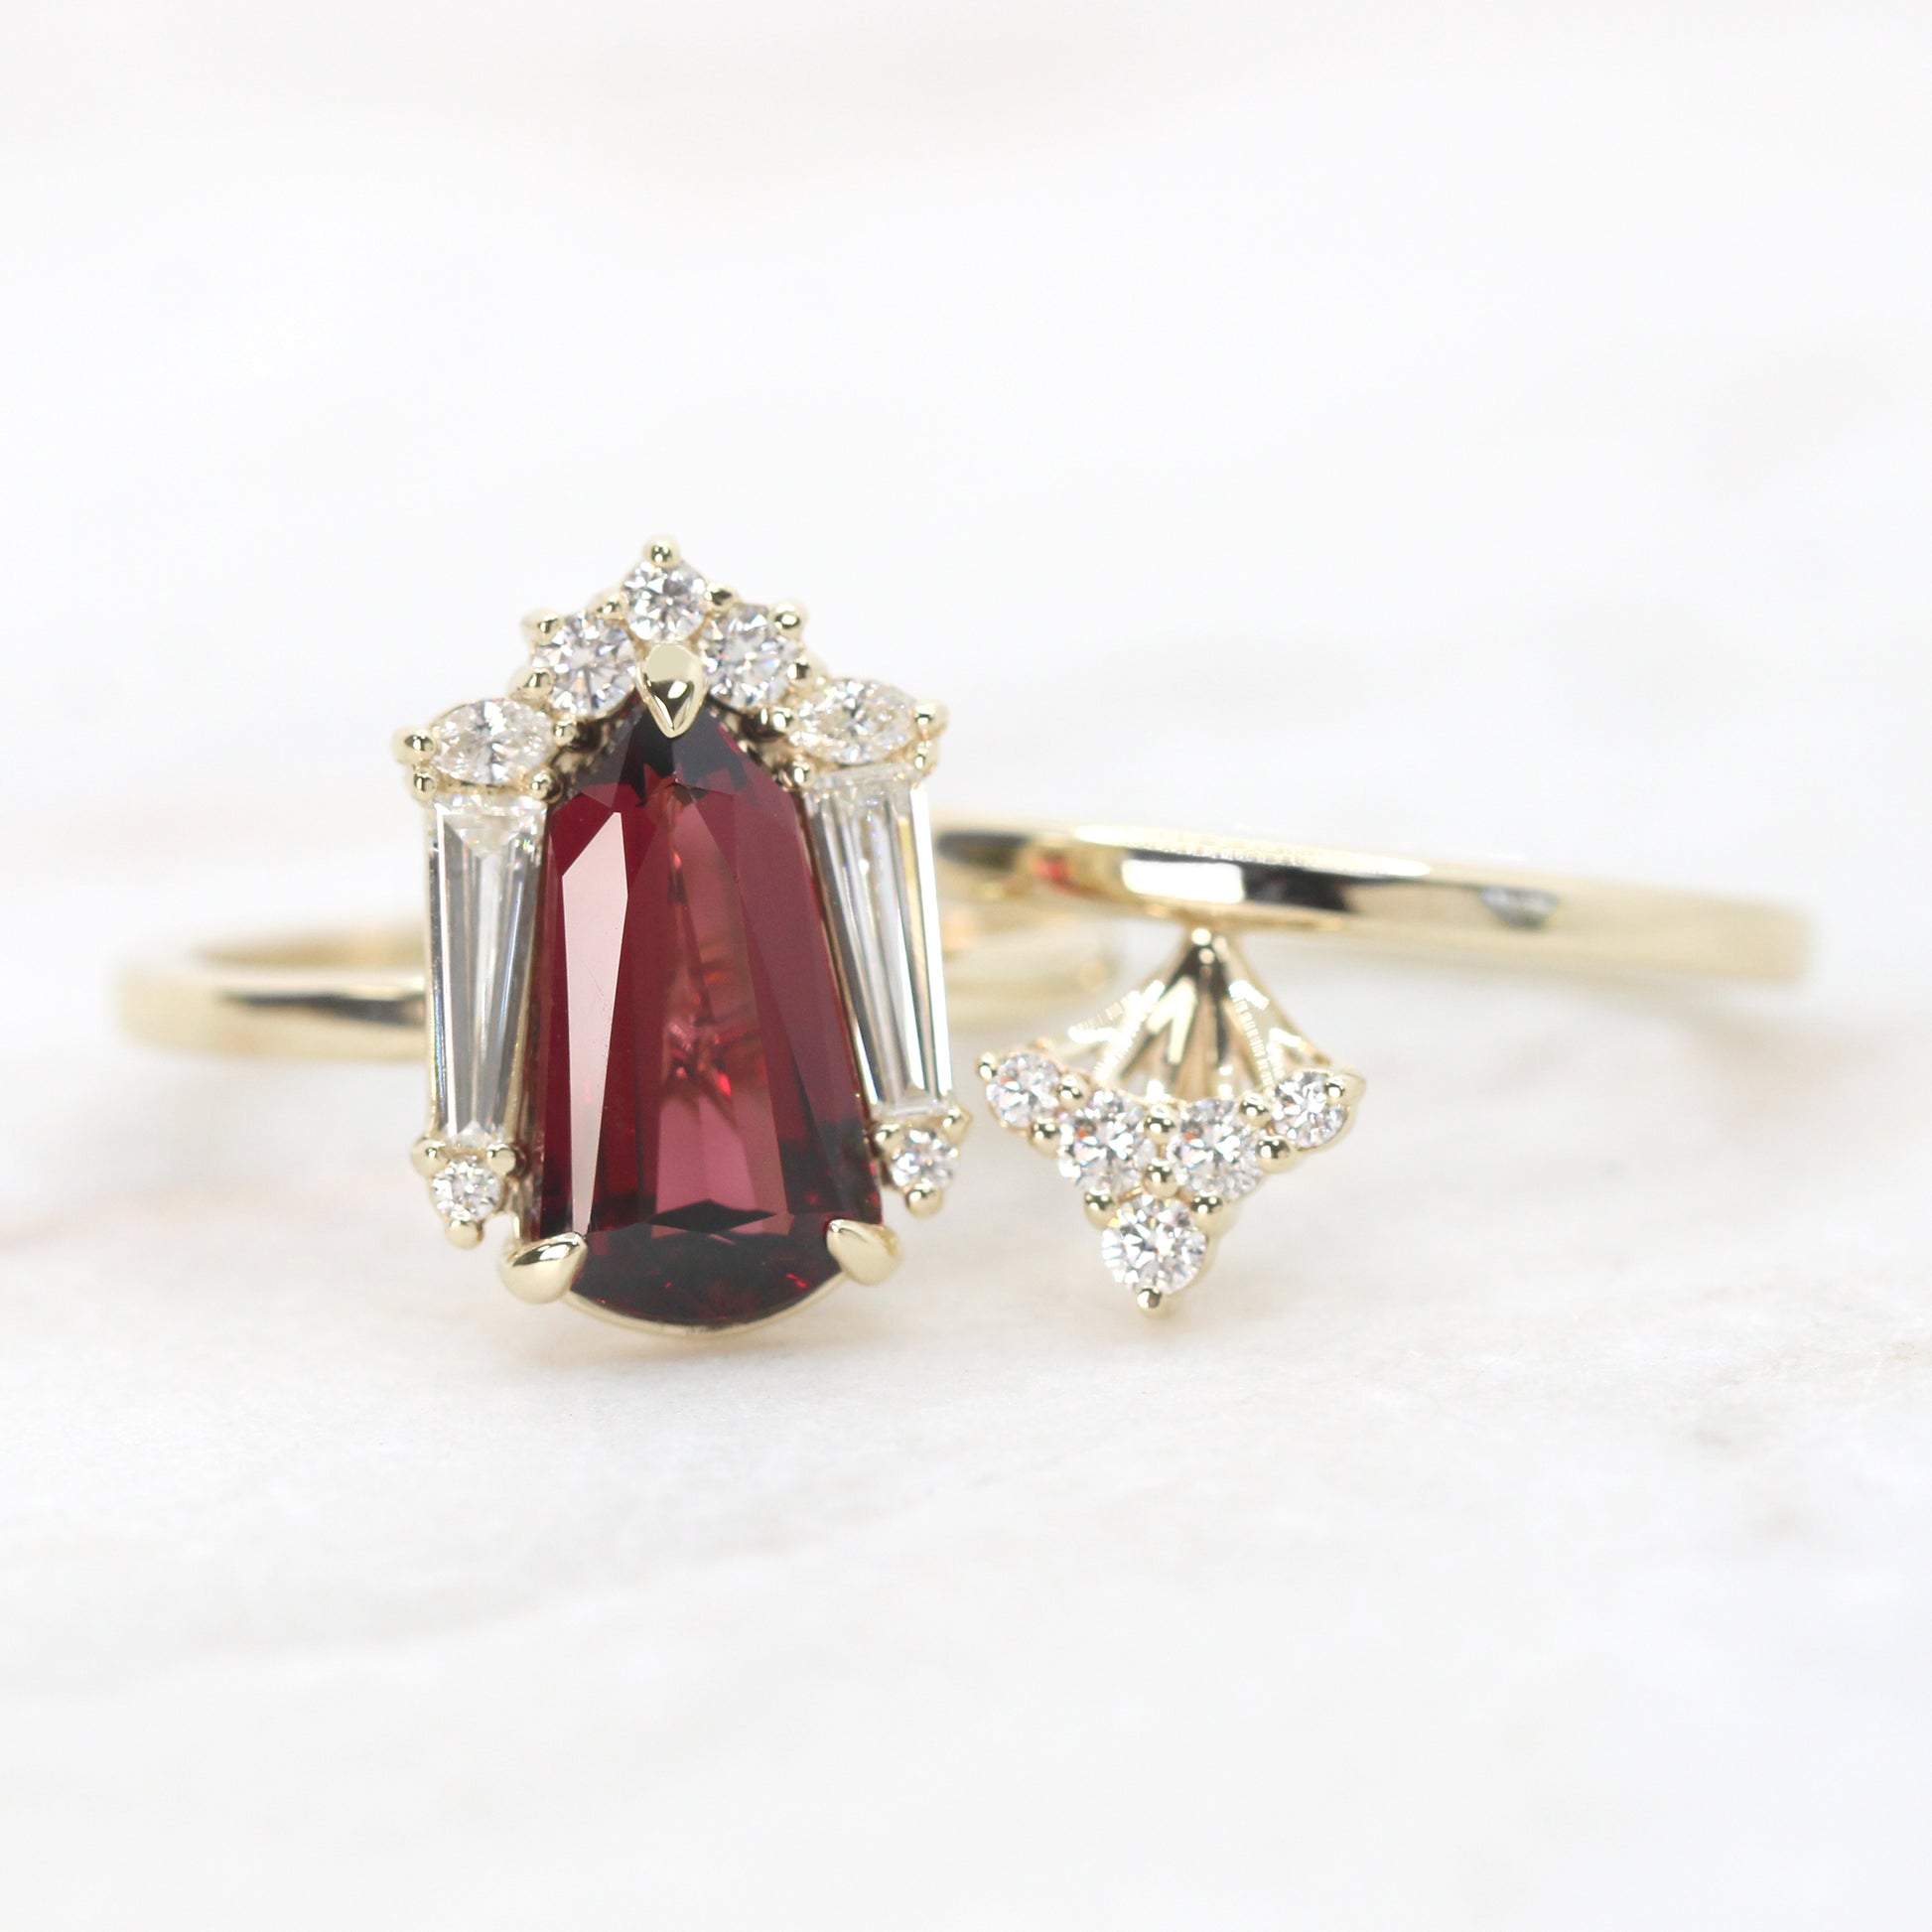 Christine Ring with a 2.68 Carat Shield Garnet and White Accent Diamonds in 14k Yellow Gold with Matching Band - Ready to Size and Ship - Midwinter Co. Alternative Bridal Rings and Modern Fine Jewelry